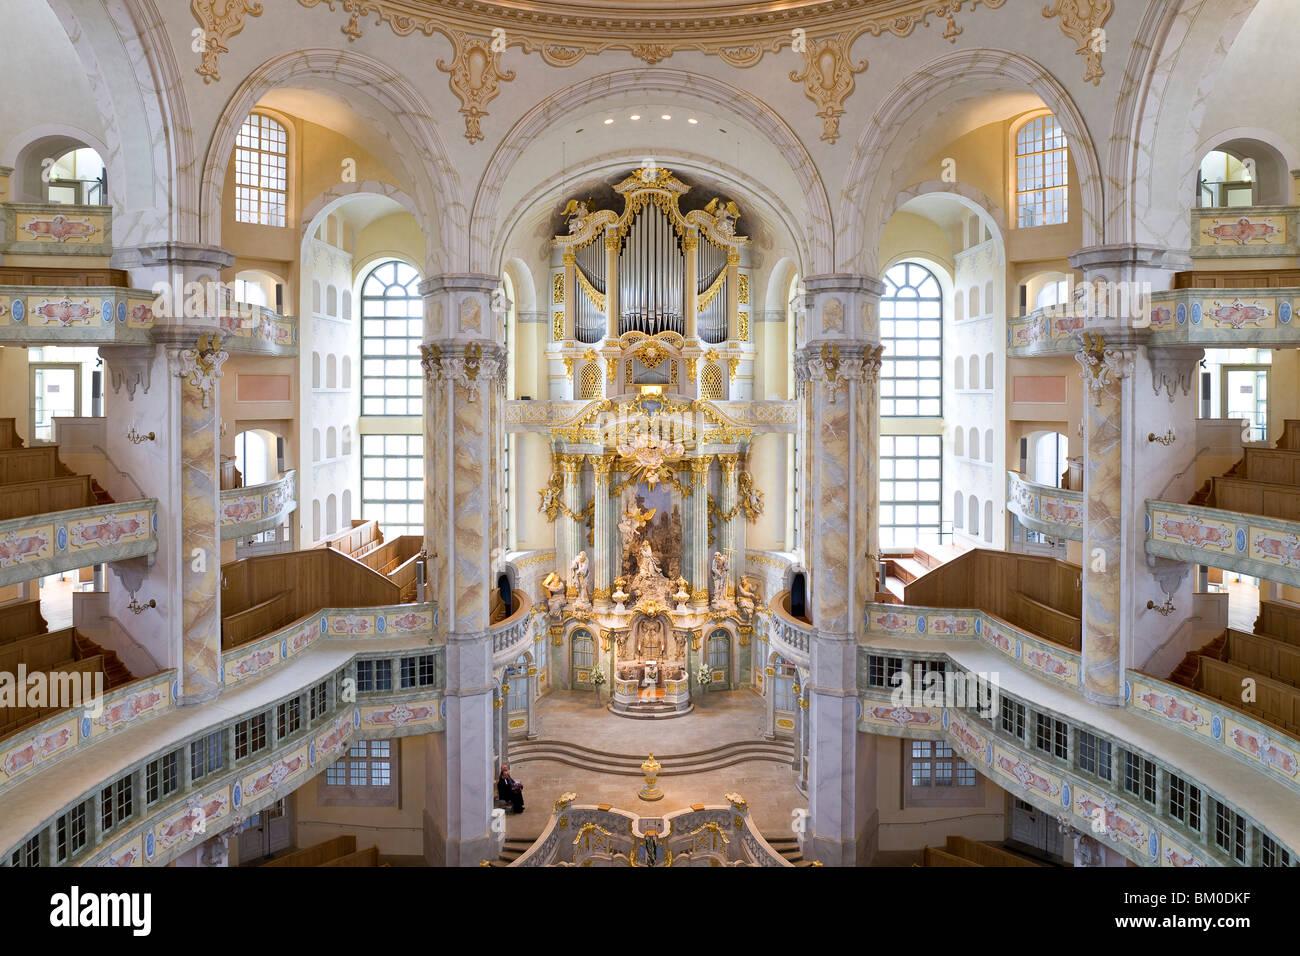 Interior view of the Dresdner Frauenkirche, Church of Our Lady, Dresden, Saxony, Germany, Europe Stock Photo